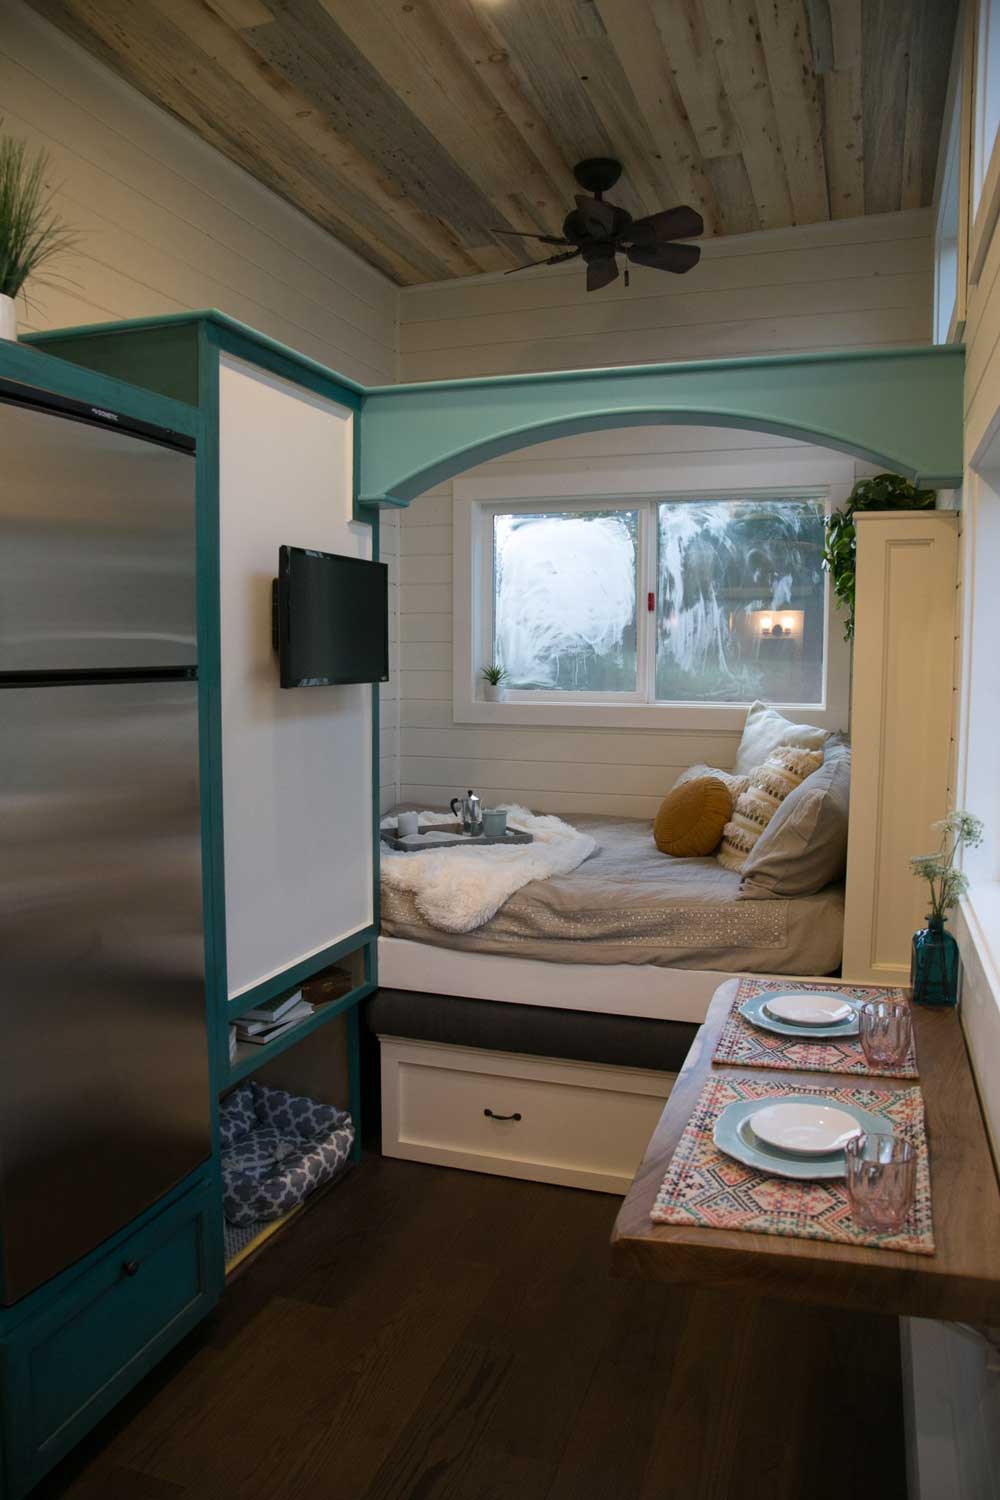 Interior of The Archway custom tiny house with kitchen, dining counter, and window seat